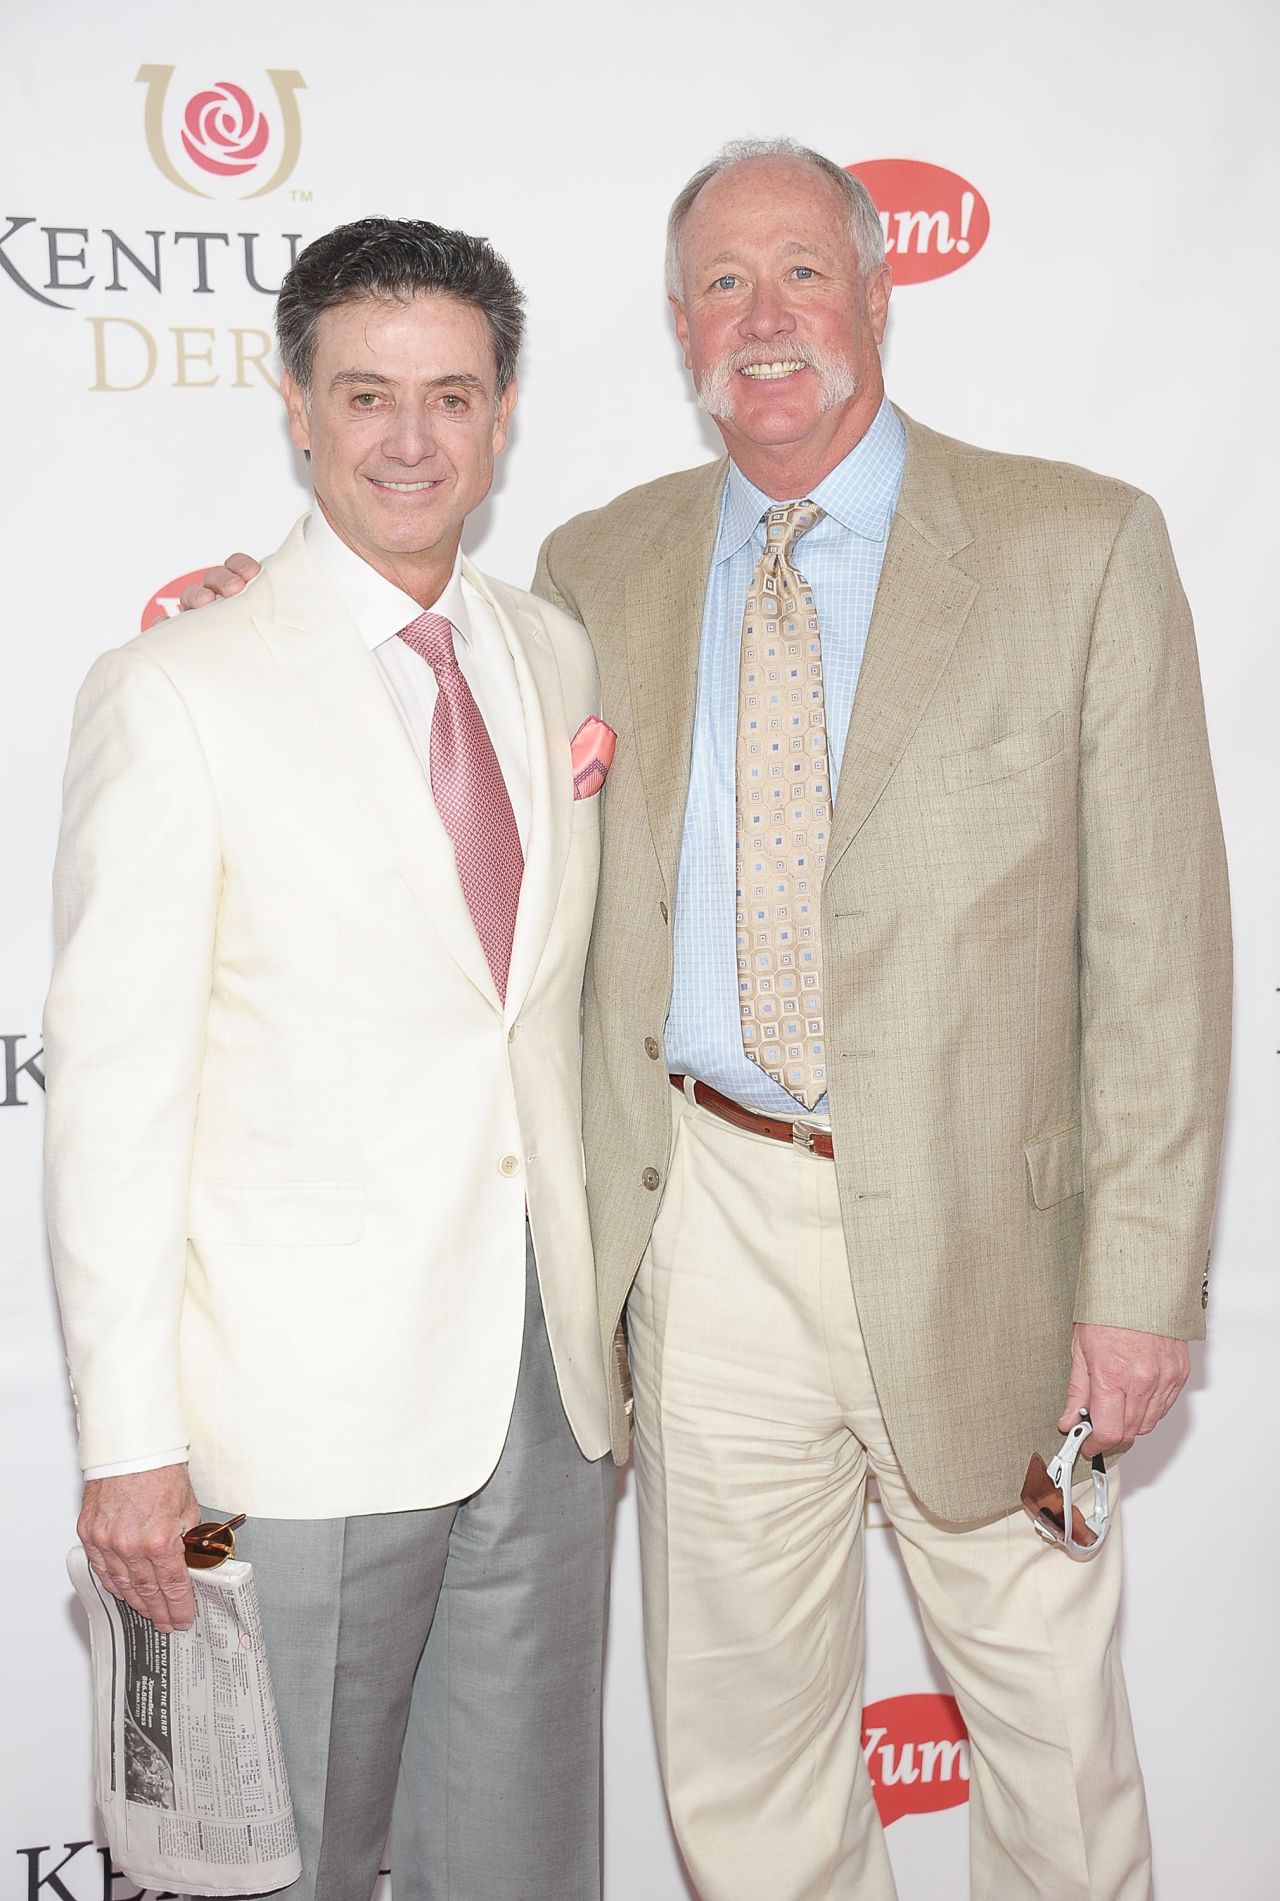 Pitino is pictured arriving at the 2011 Kentucky Derby with former pro-baseball player Richard "Goose" Gossage.